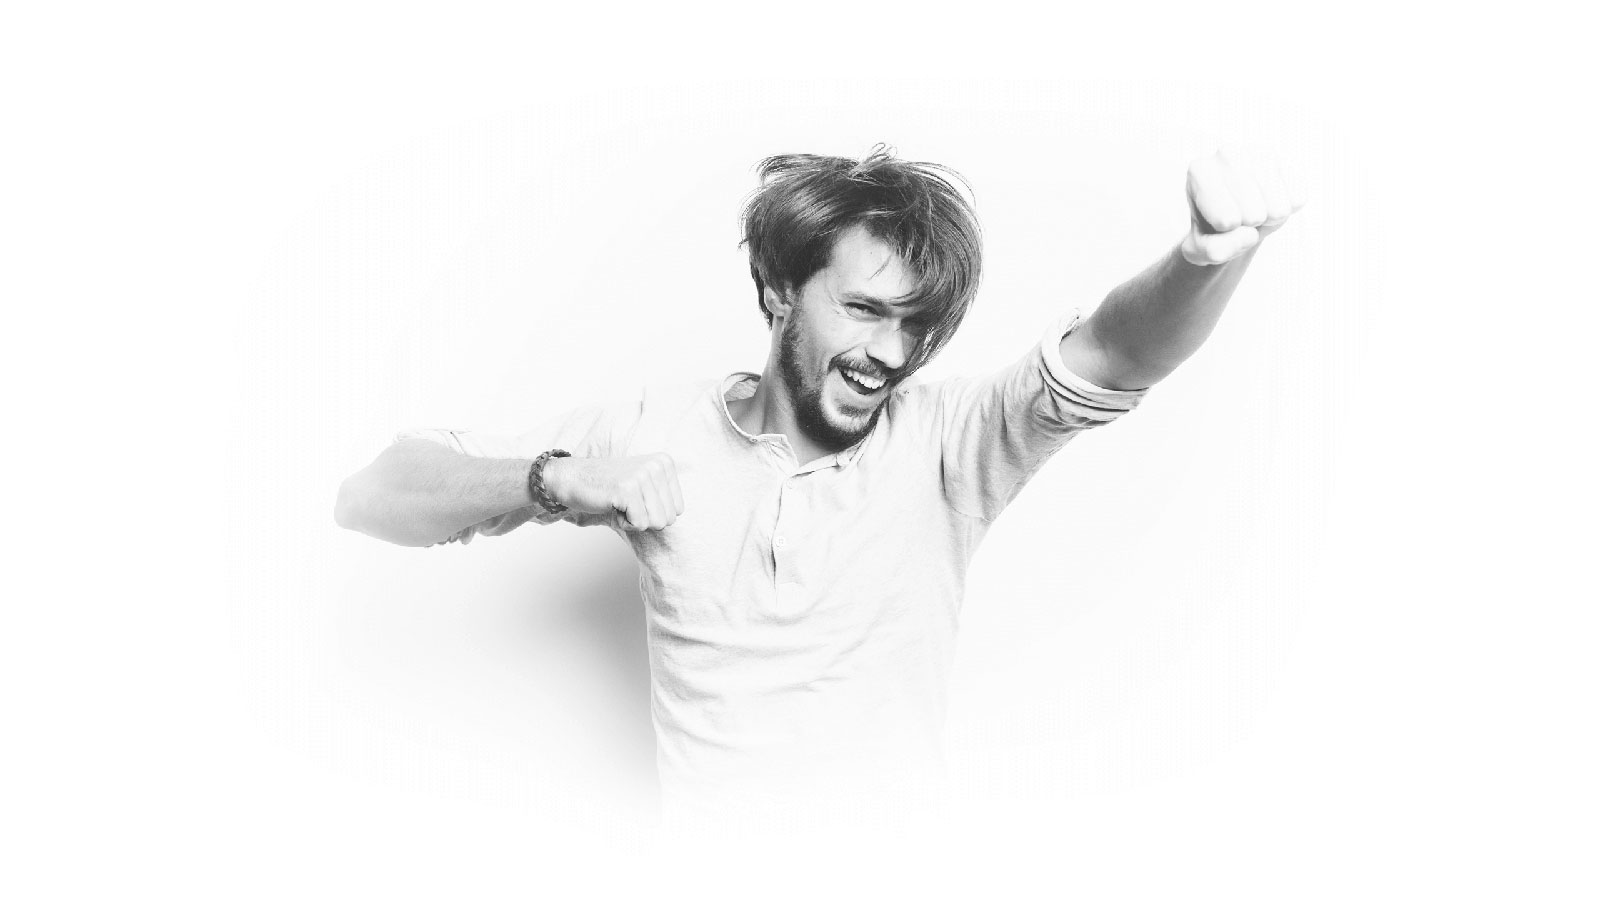 Black and white portrait of a cheerful man standing with his hands raised against the white wall